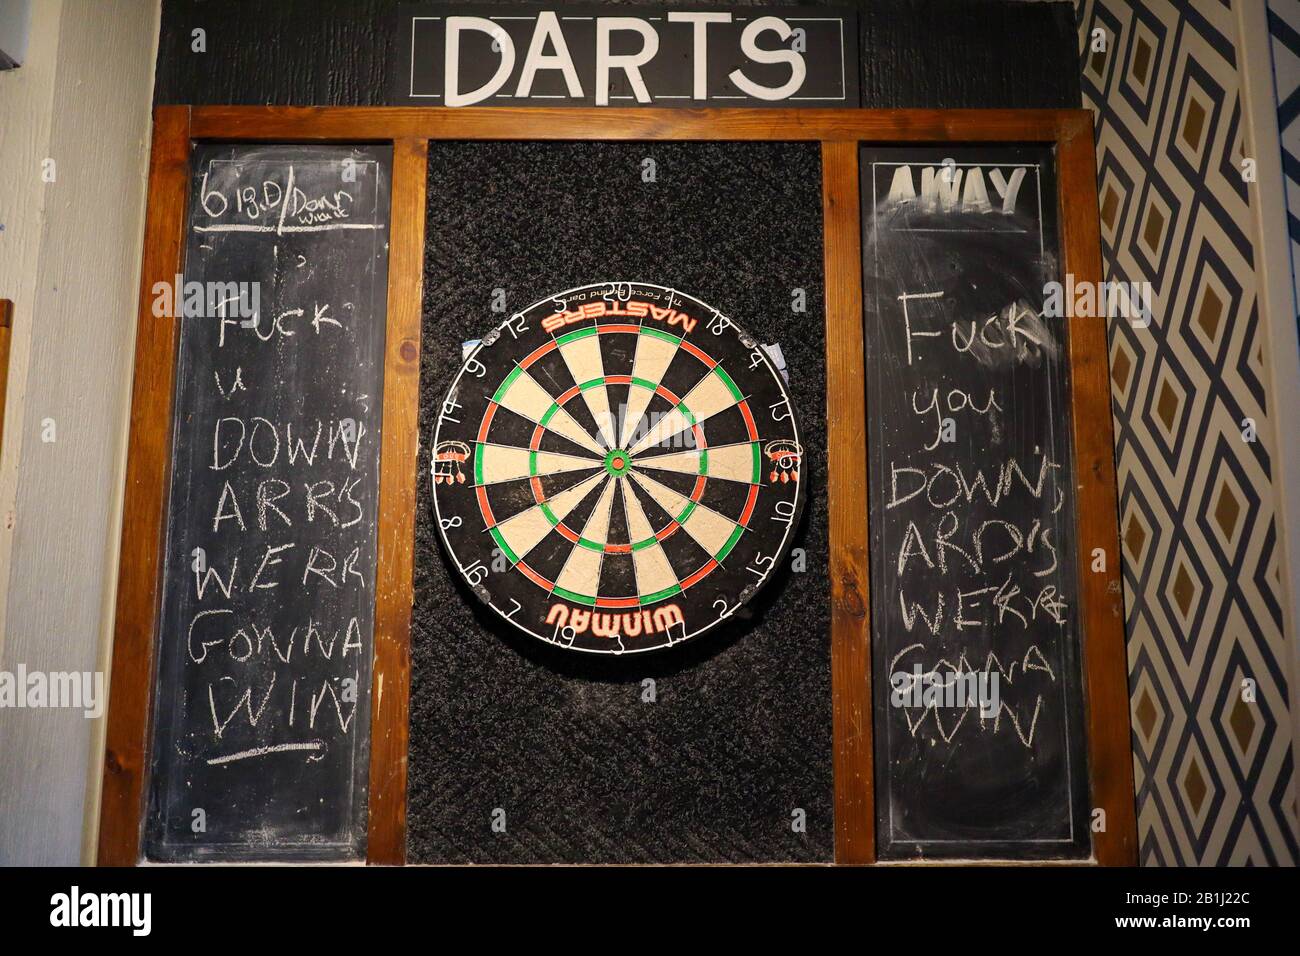 Ashbourne, UK. 25th Feb, 2020. A dart board in Ye Olde Vaults pub with message for the Down’Ard’s. The first day of the two day Shrovetide Football Game in the market town of Ashbourne, Derbyshire. The game is played with two teams, the Up'Ards and the Down'Ards. There are two goal posts 3 miles (4.8 km) apart, one at Sturston Mill (where the Up'Ards attempt to score), other at Clifton Mill (where the Down'Ards score). Penelope Barritt/Alamy Live News Stock Photo